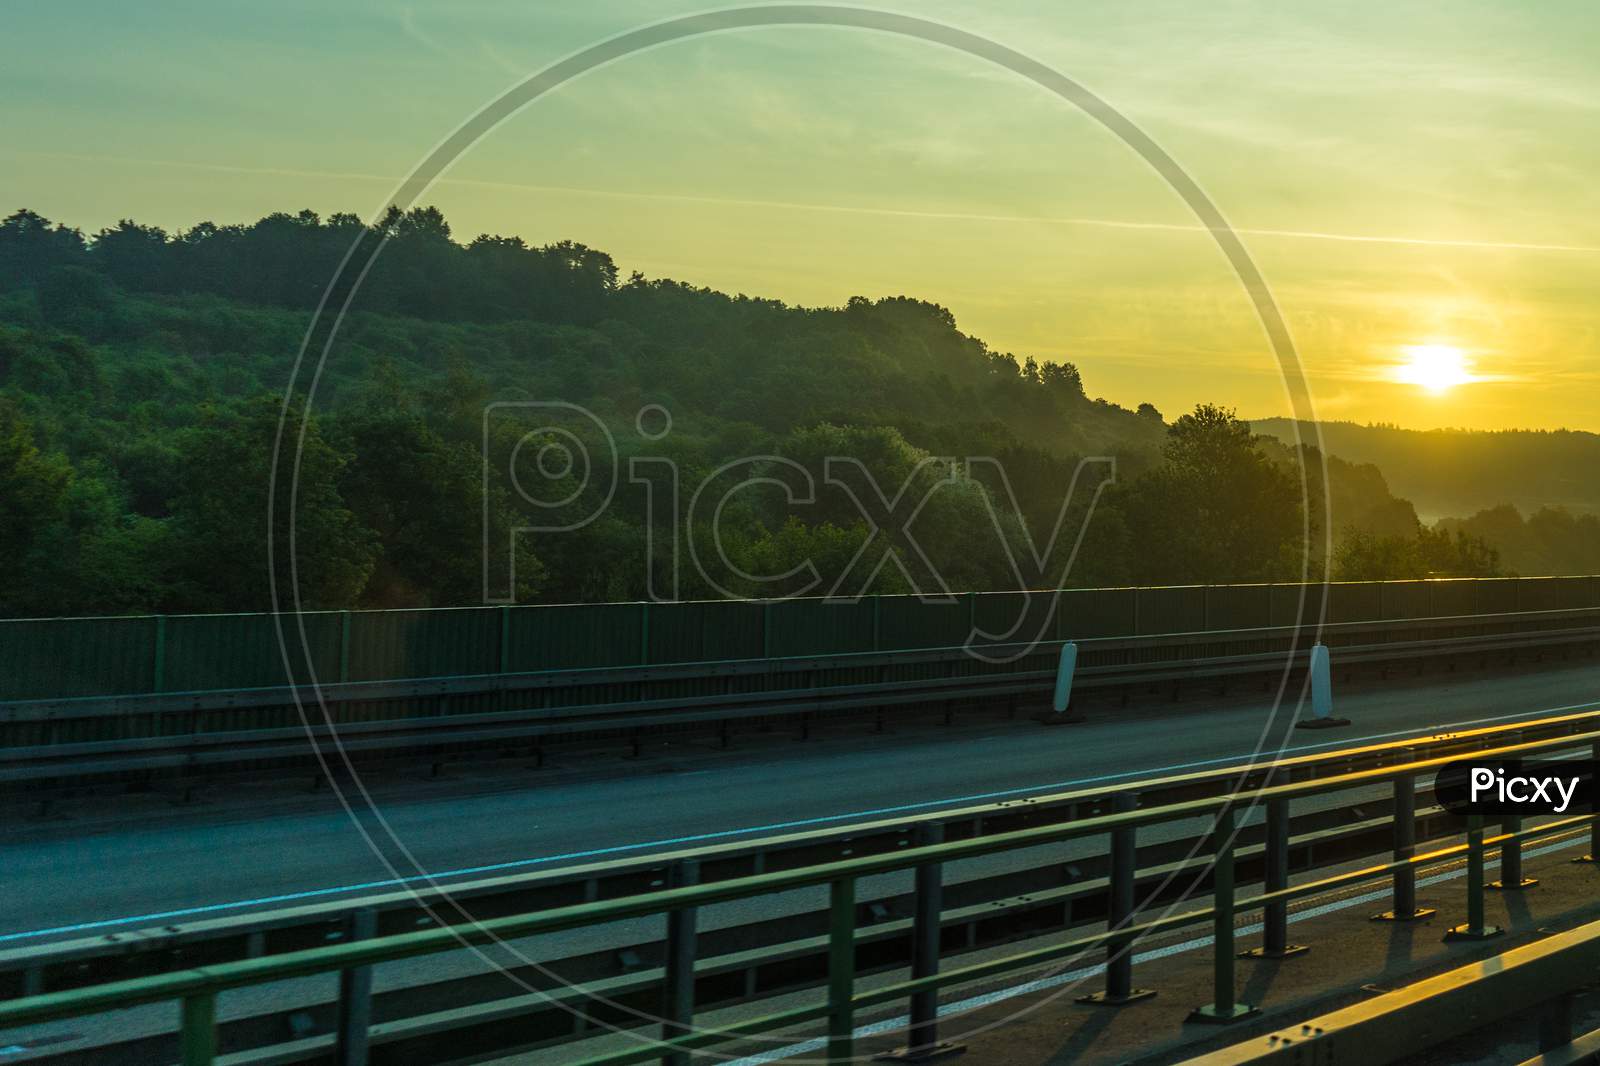 Germany, Frankfurt, Sunrise,, A Large Long Train On A Track Next To A Body Of Water